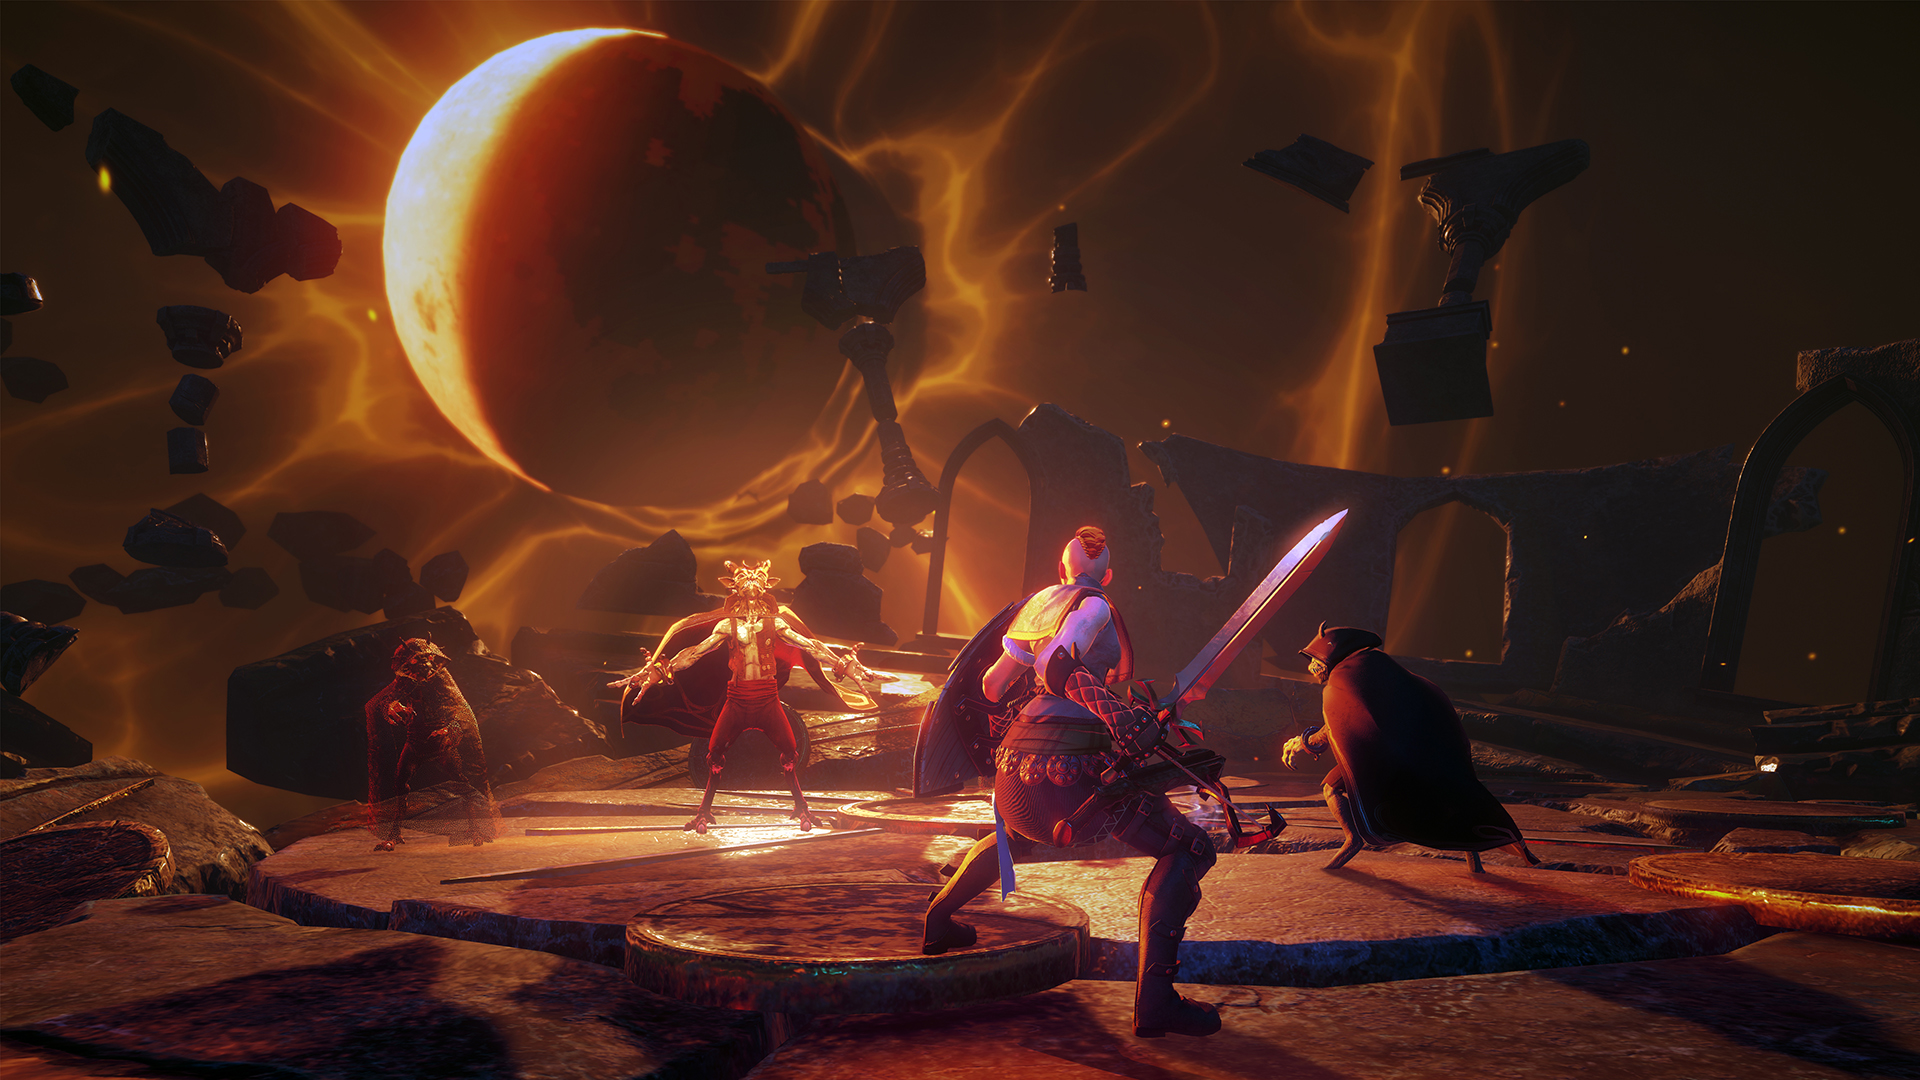 hand of fate 2, The Servant and The Beast DLC, xbox one, ps4, sony, pc gaming, xbox, stride pr, video game pr, indie developers, indie gaming, indie pr, videogame, deck, defiant development